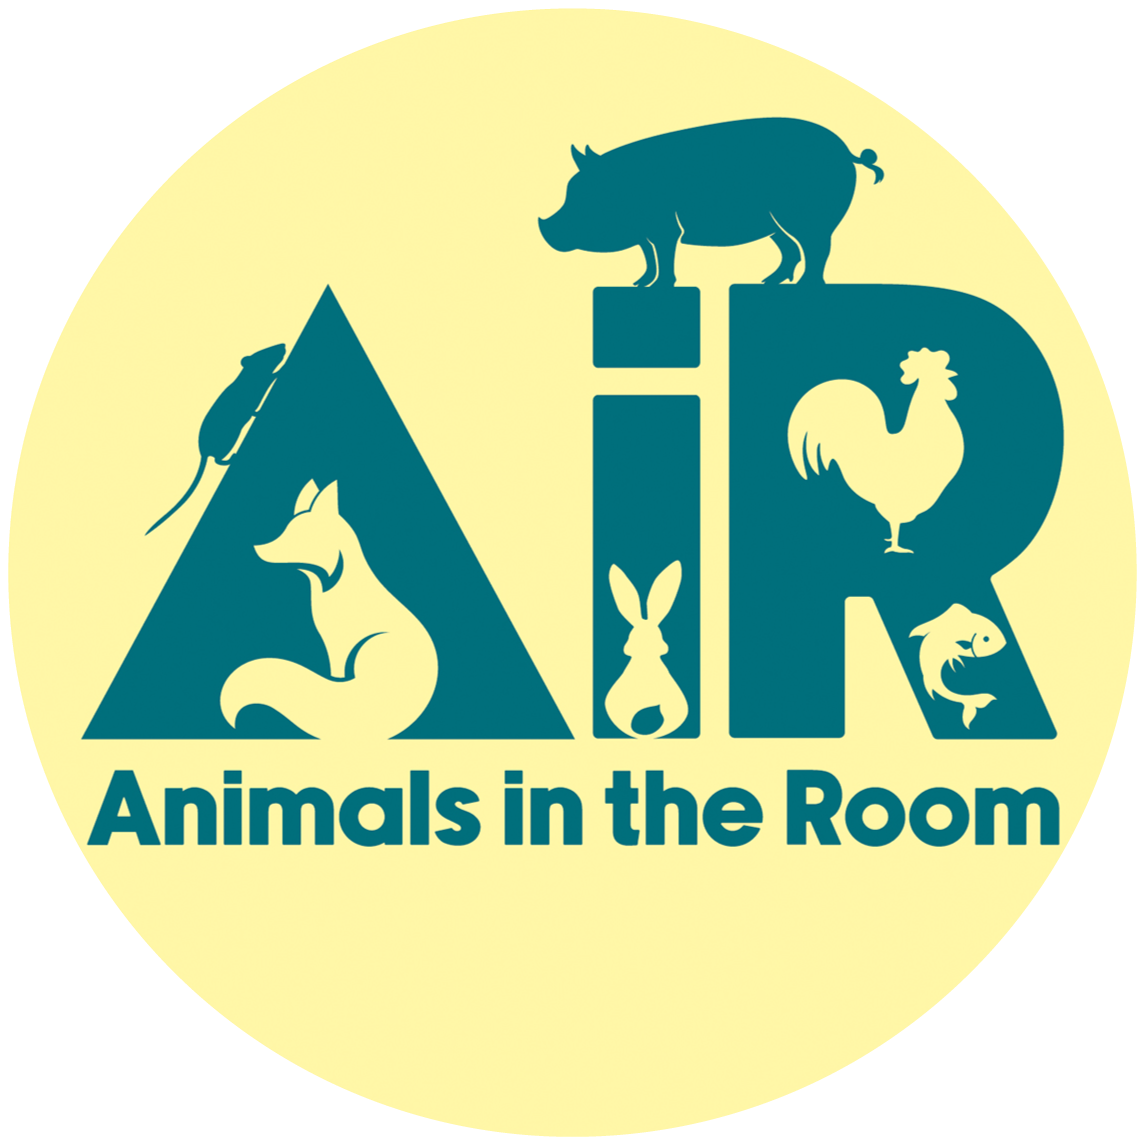 Animals in the Room